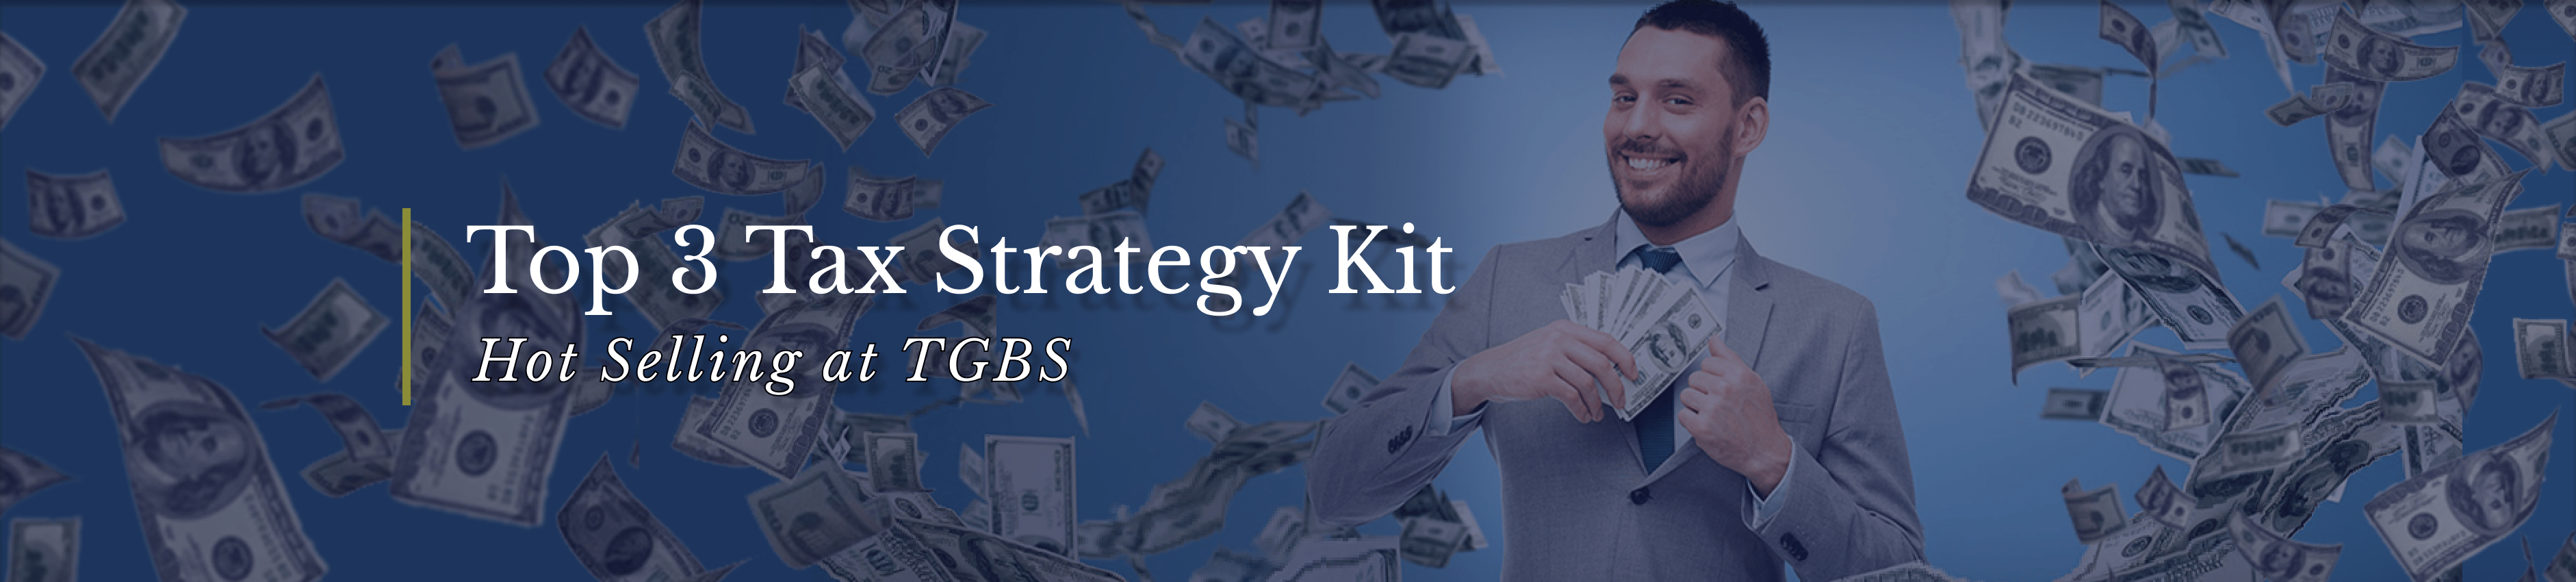 Tax Strategy Kit Banner